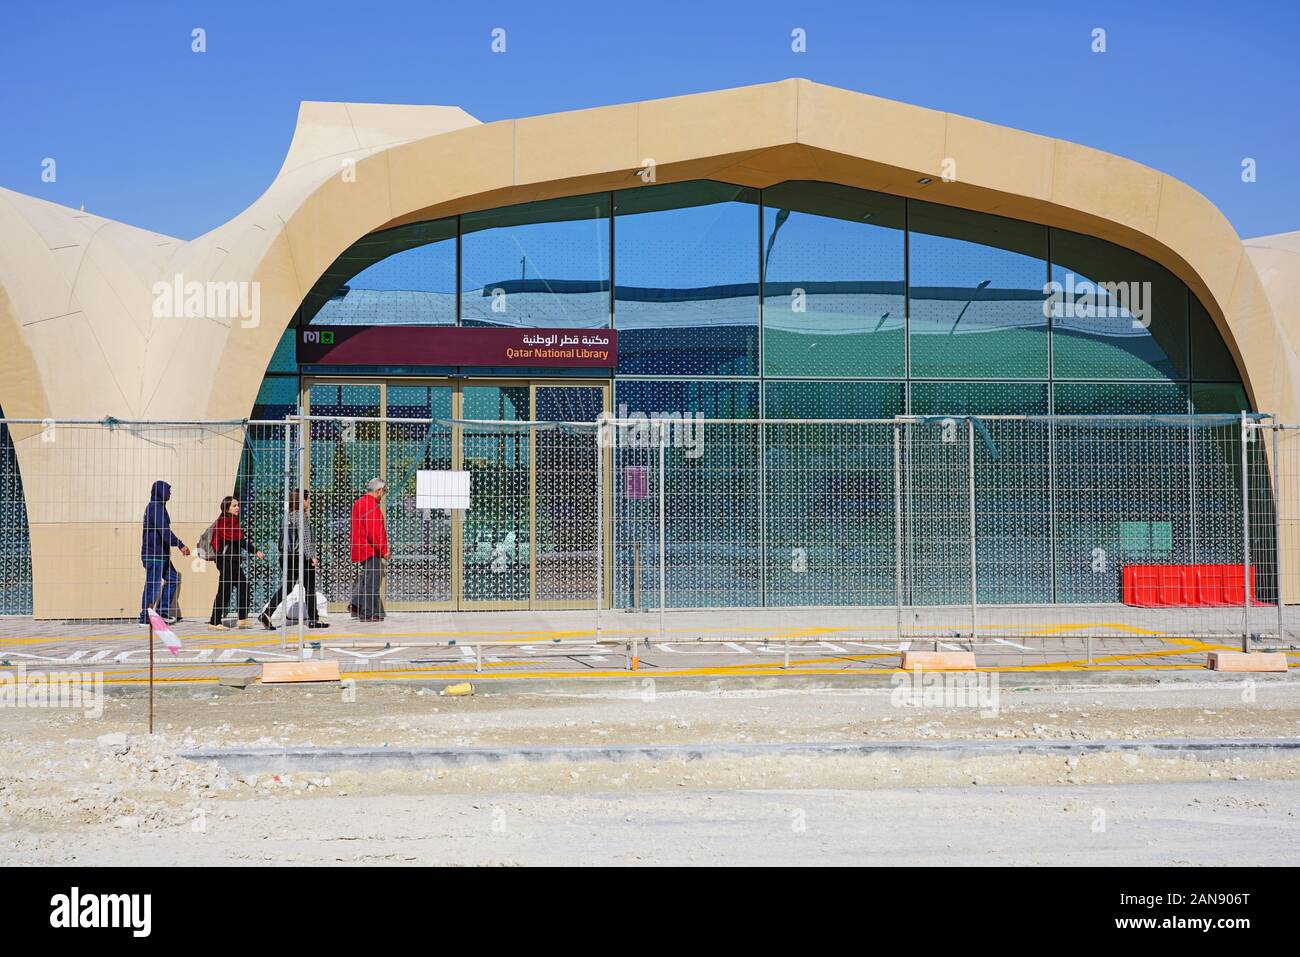 DOHA, QATAR -12 DEC 2019- View of the Qatar National Library station of the Qatar Metro, a new rapid transit system in Doha, in the Education City Com Stock Photo